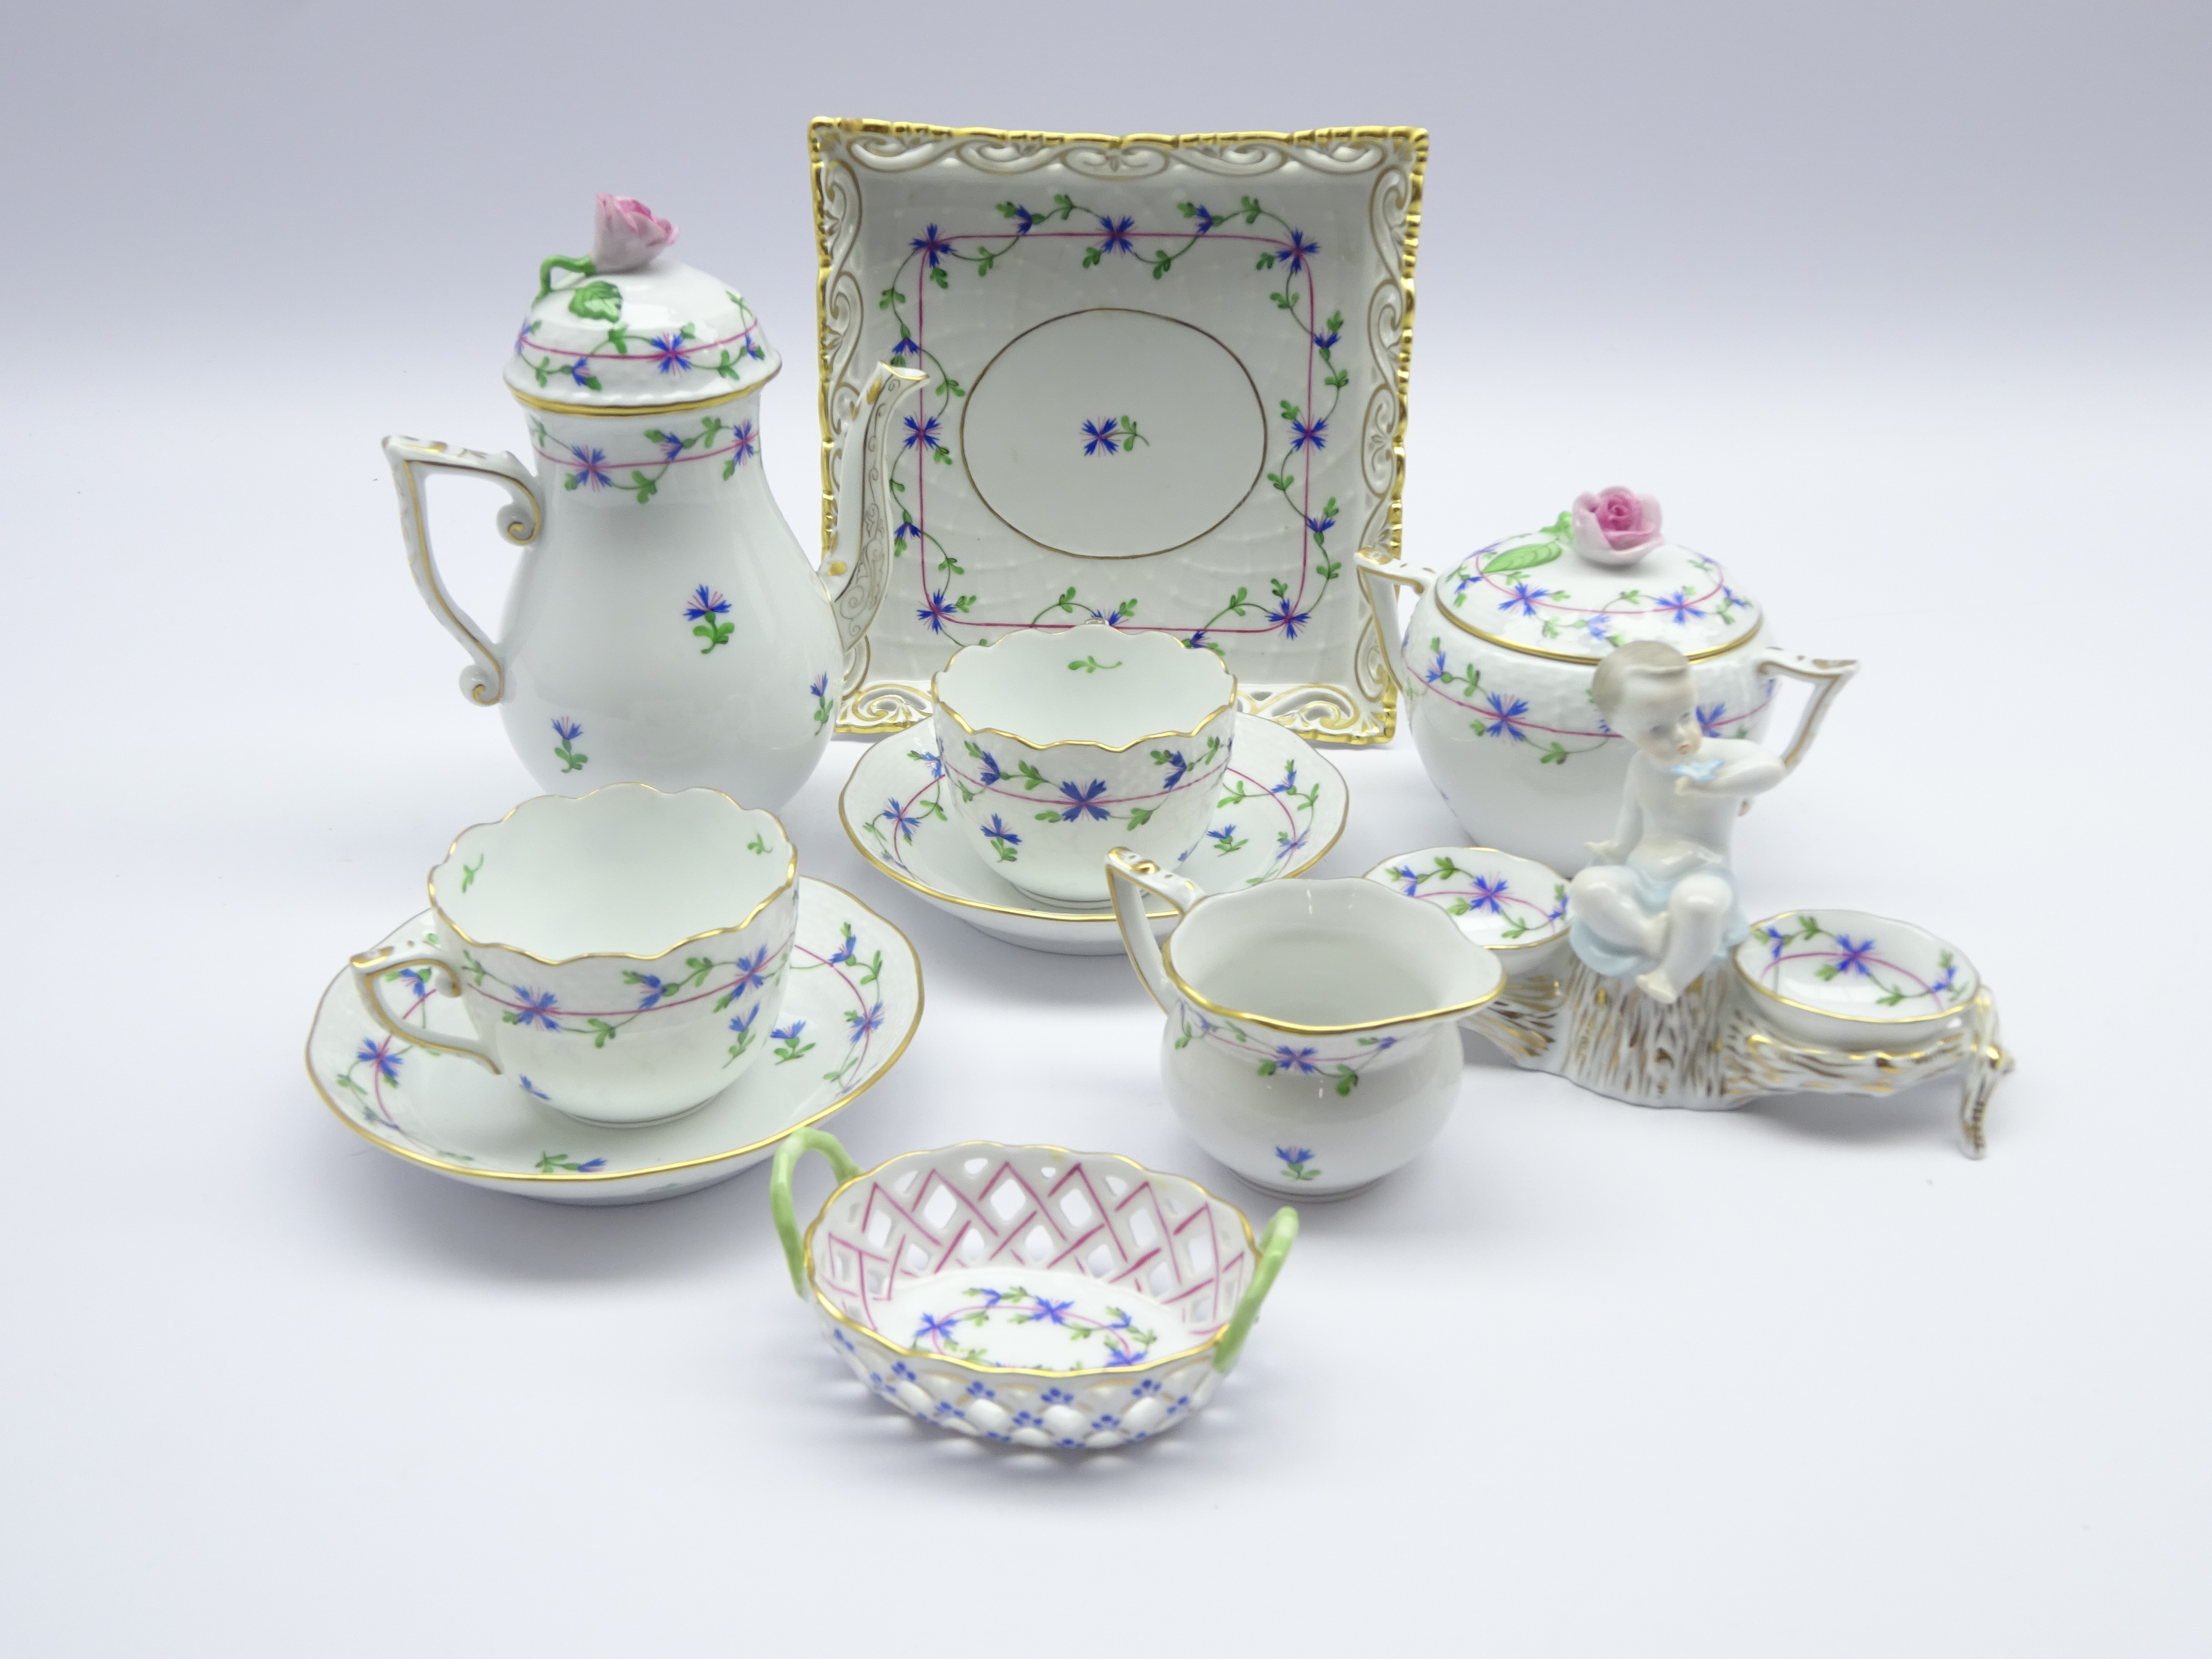 Herend 'Cornflower Garland' coffee ware comprising two cups and saucers, hot water pot, cream jug, - Image 2 of 2